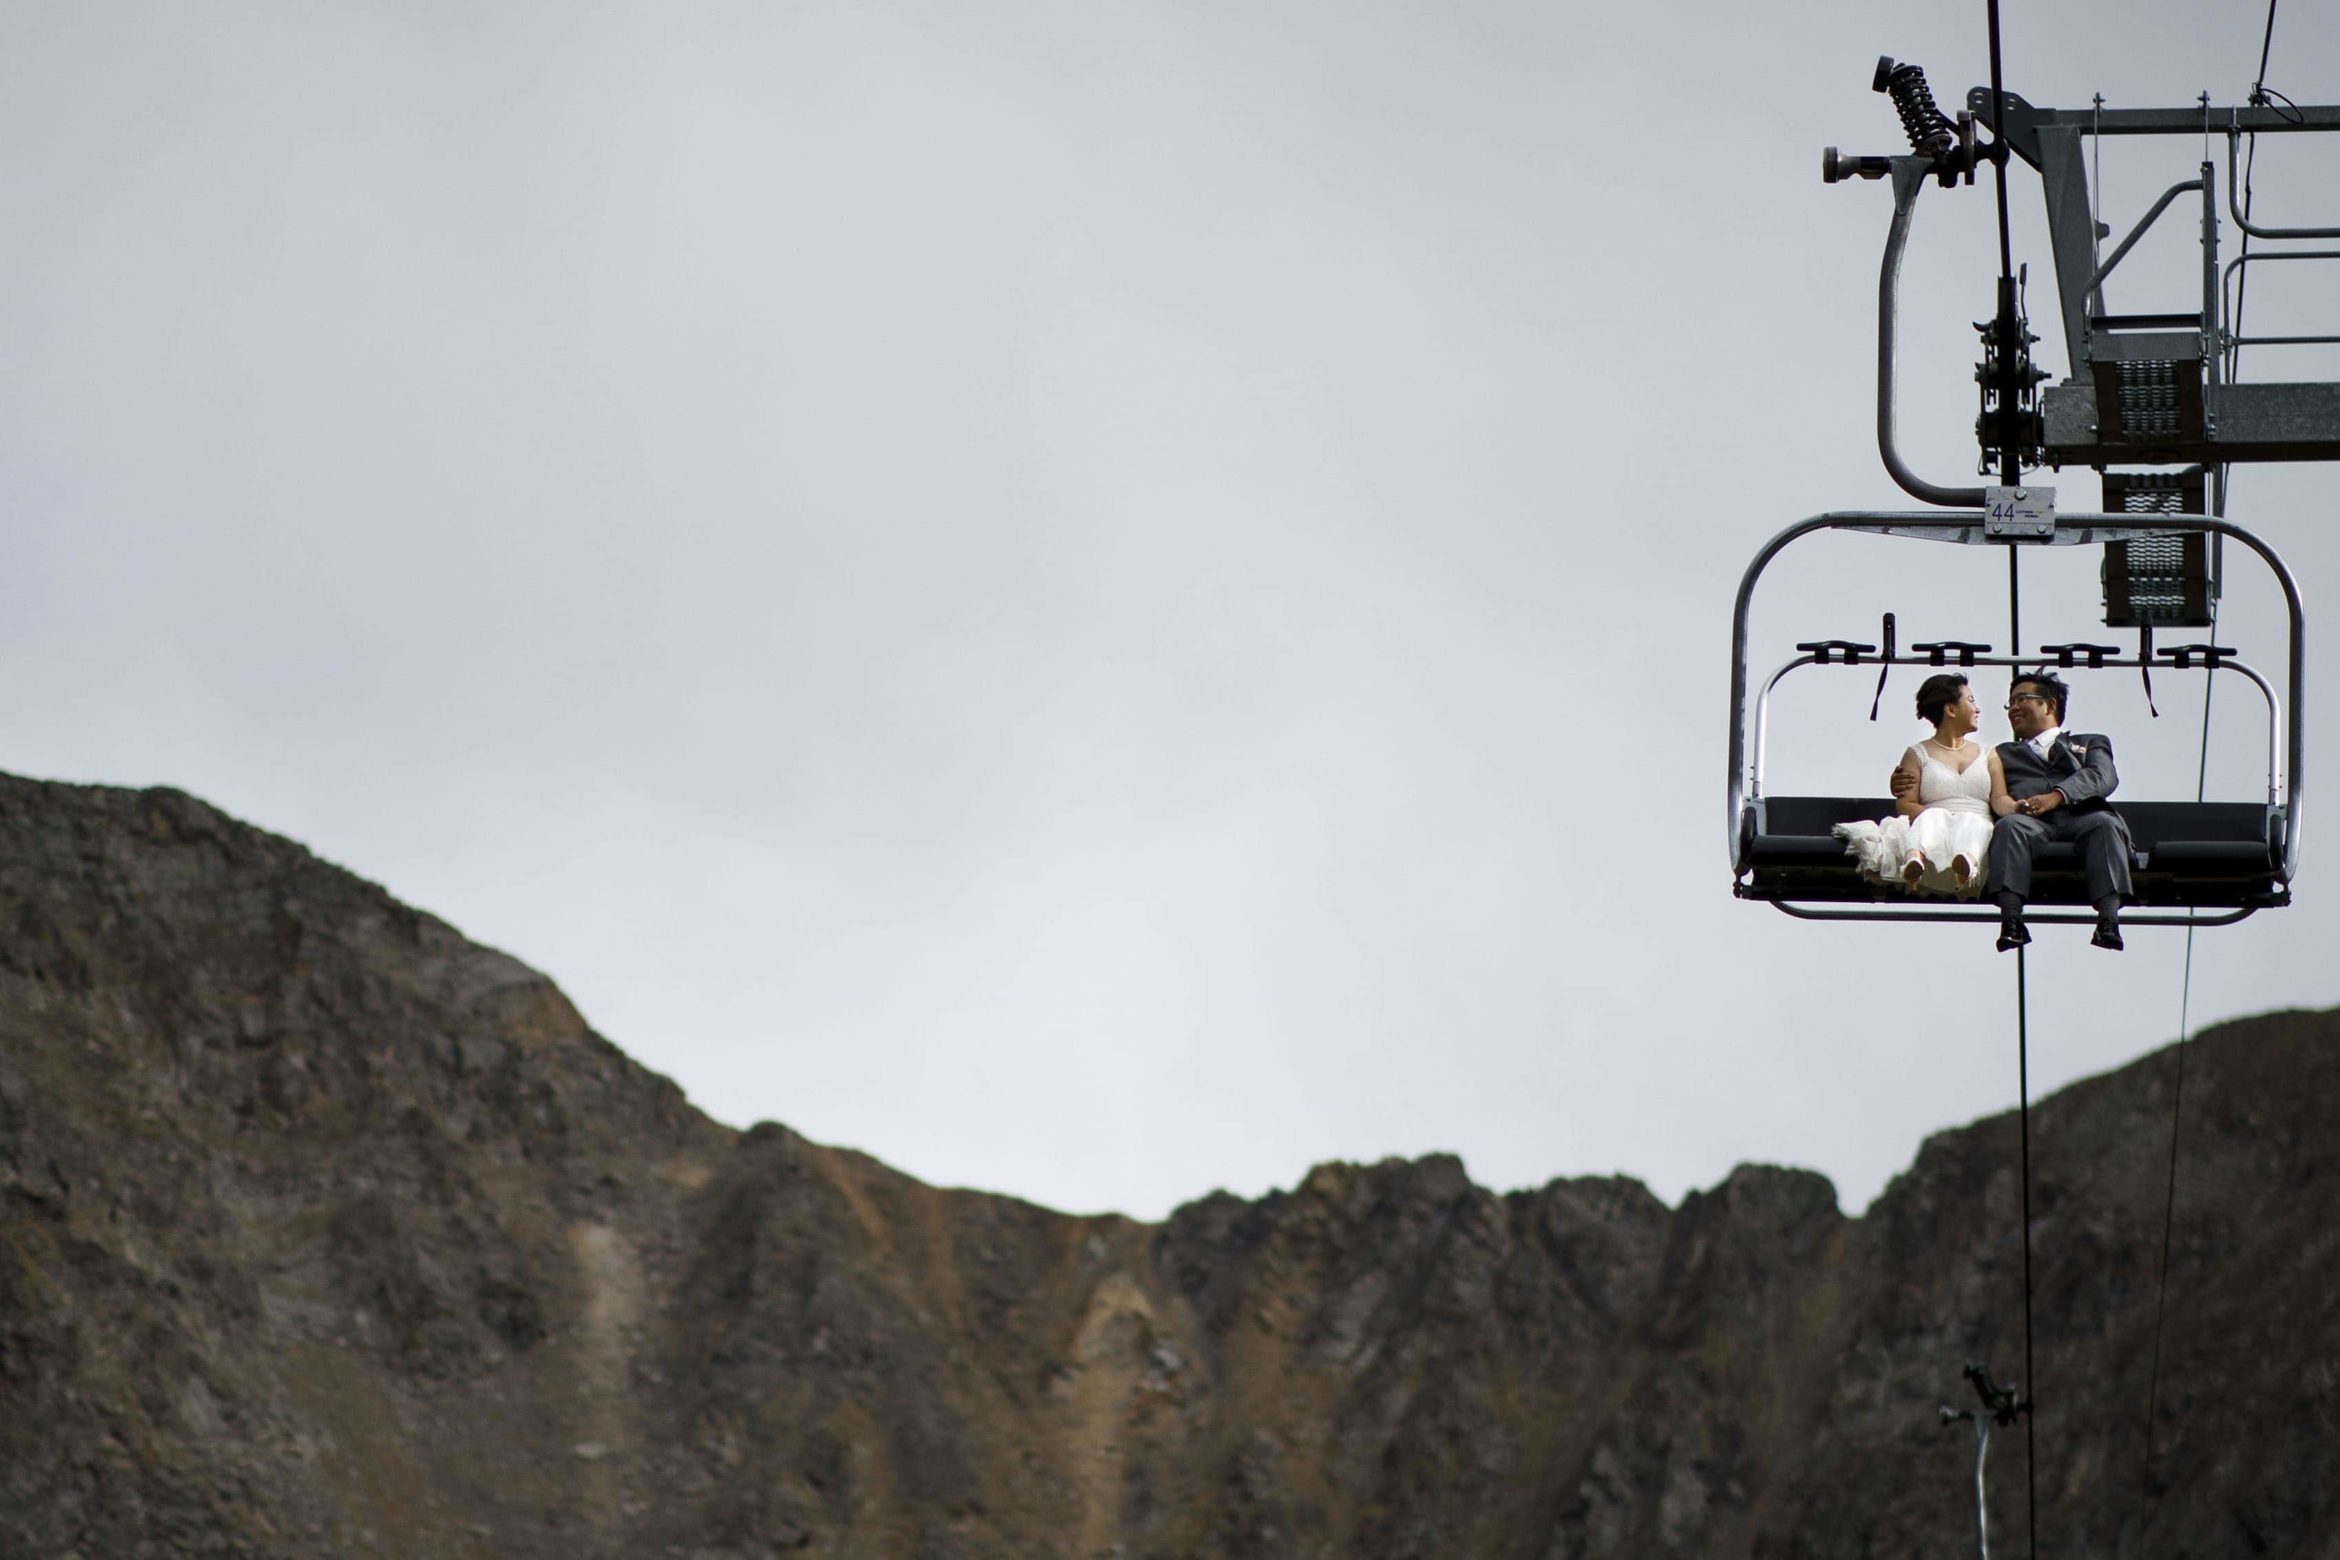 A couple ride the Black Mountain Express chairlift at A Basin on their wedding day